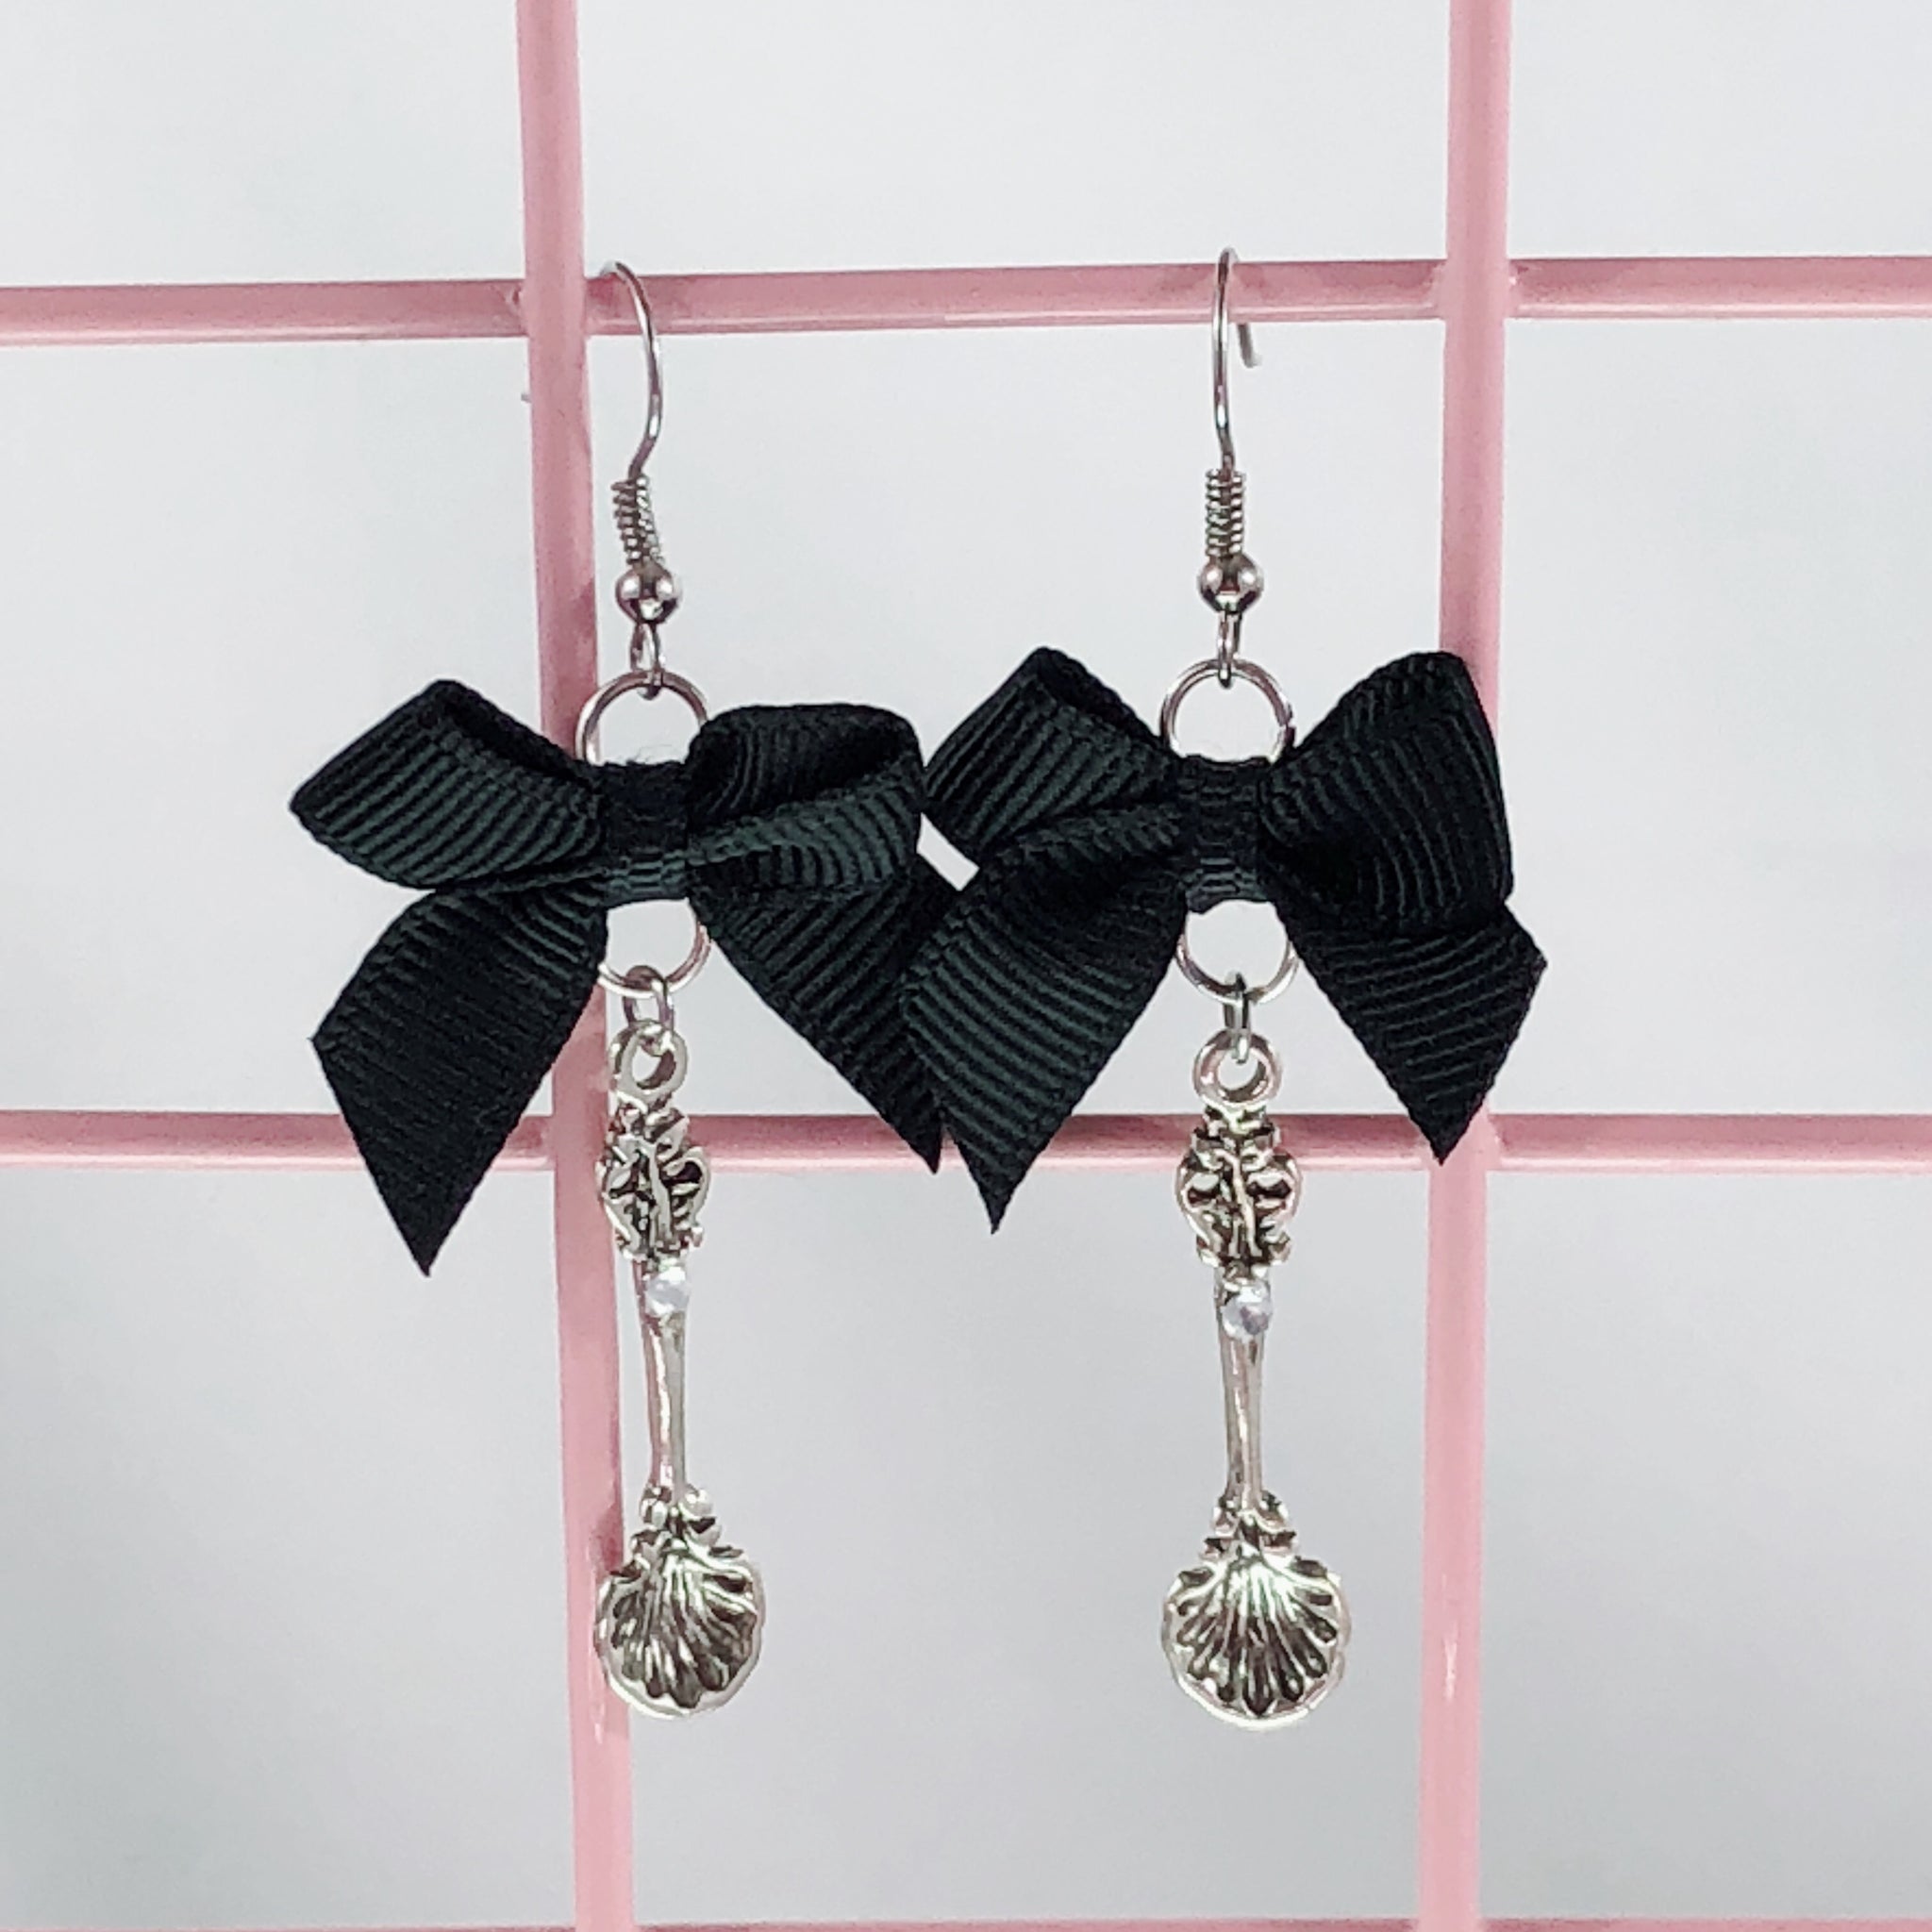 Silver Spoon Earrings (5 Colors) - Lolita Collective